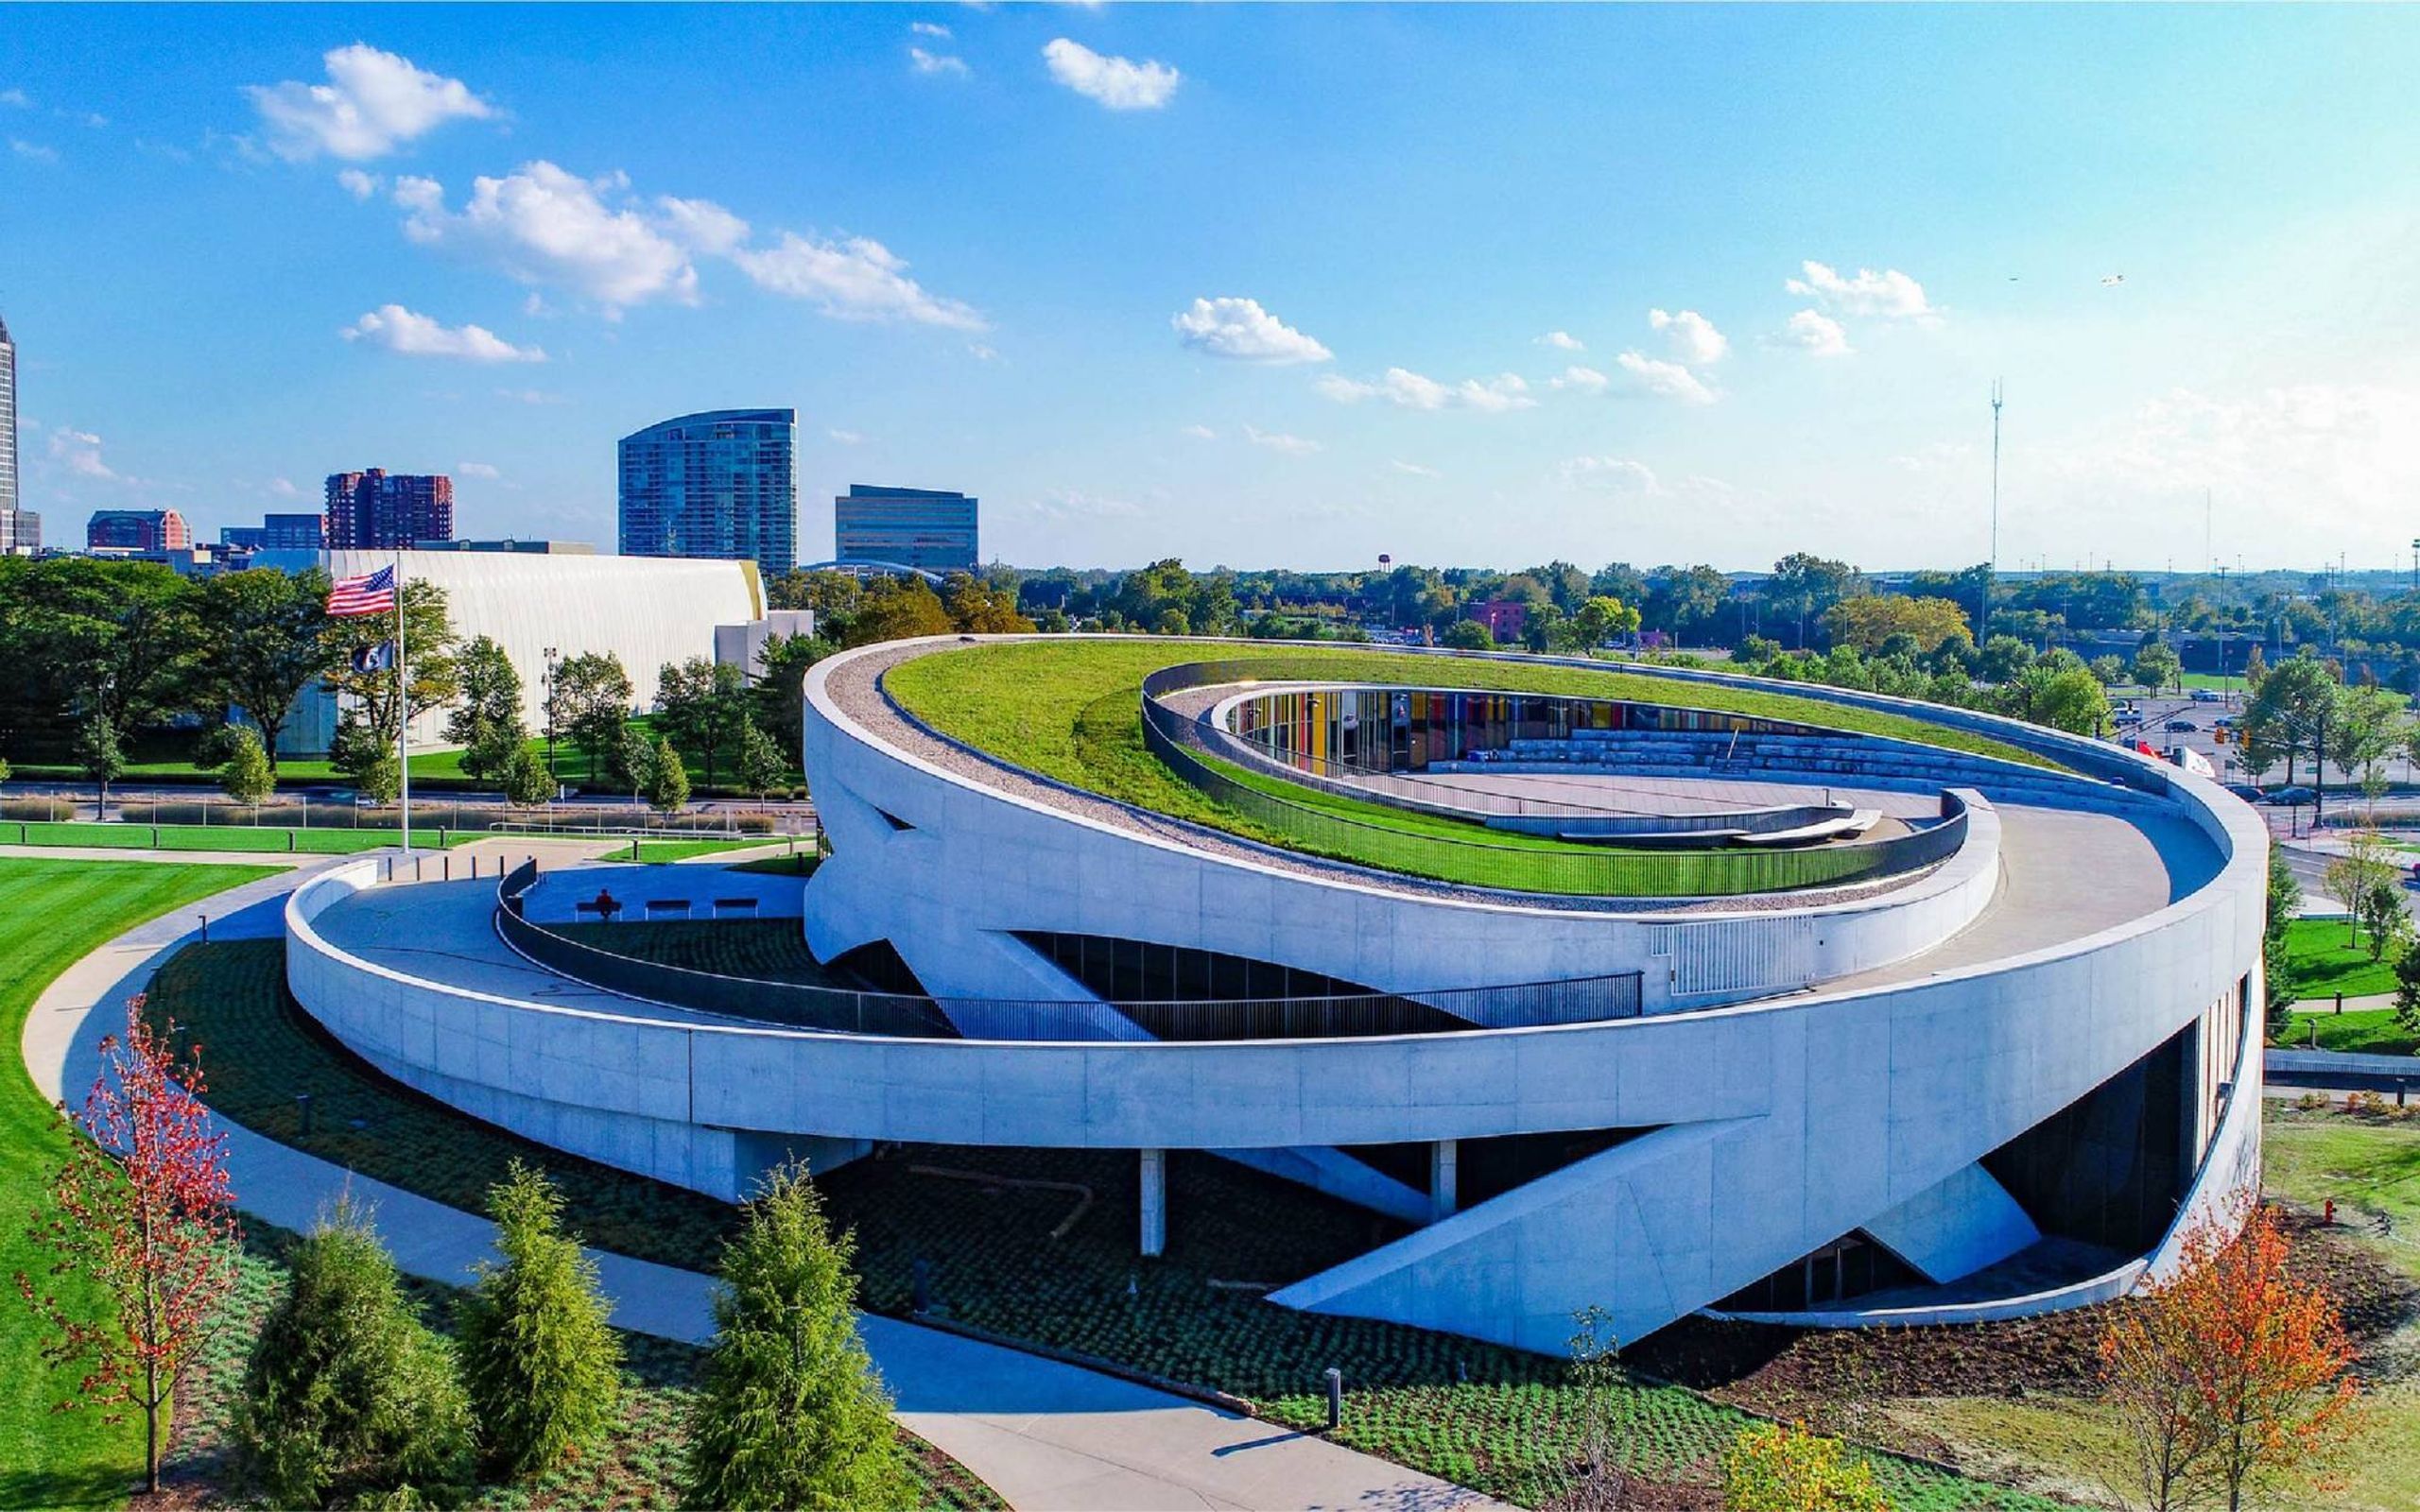 Exterior of a circular building with a ramp up to a green roof. Next Avenue, national veterans memorial and museum